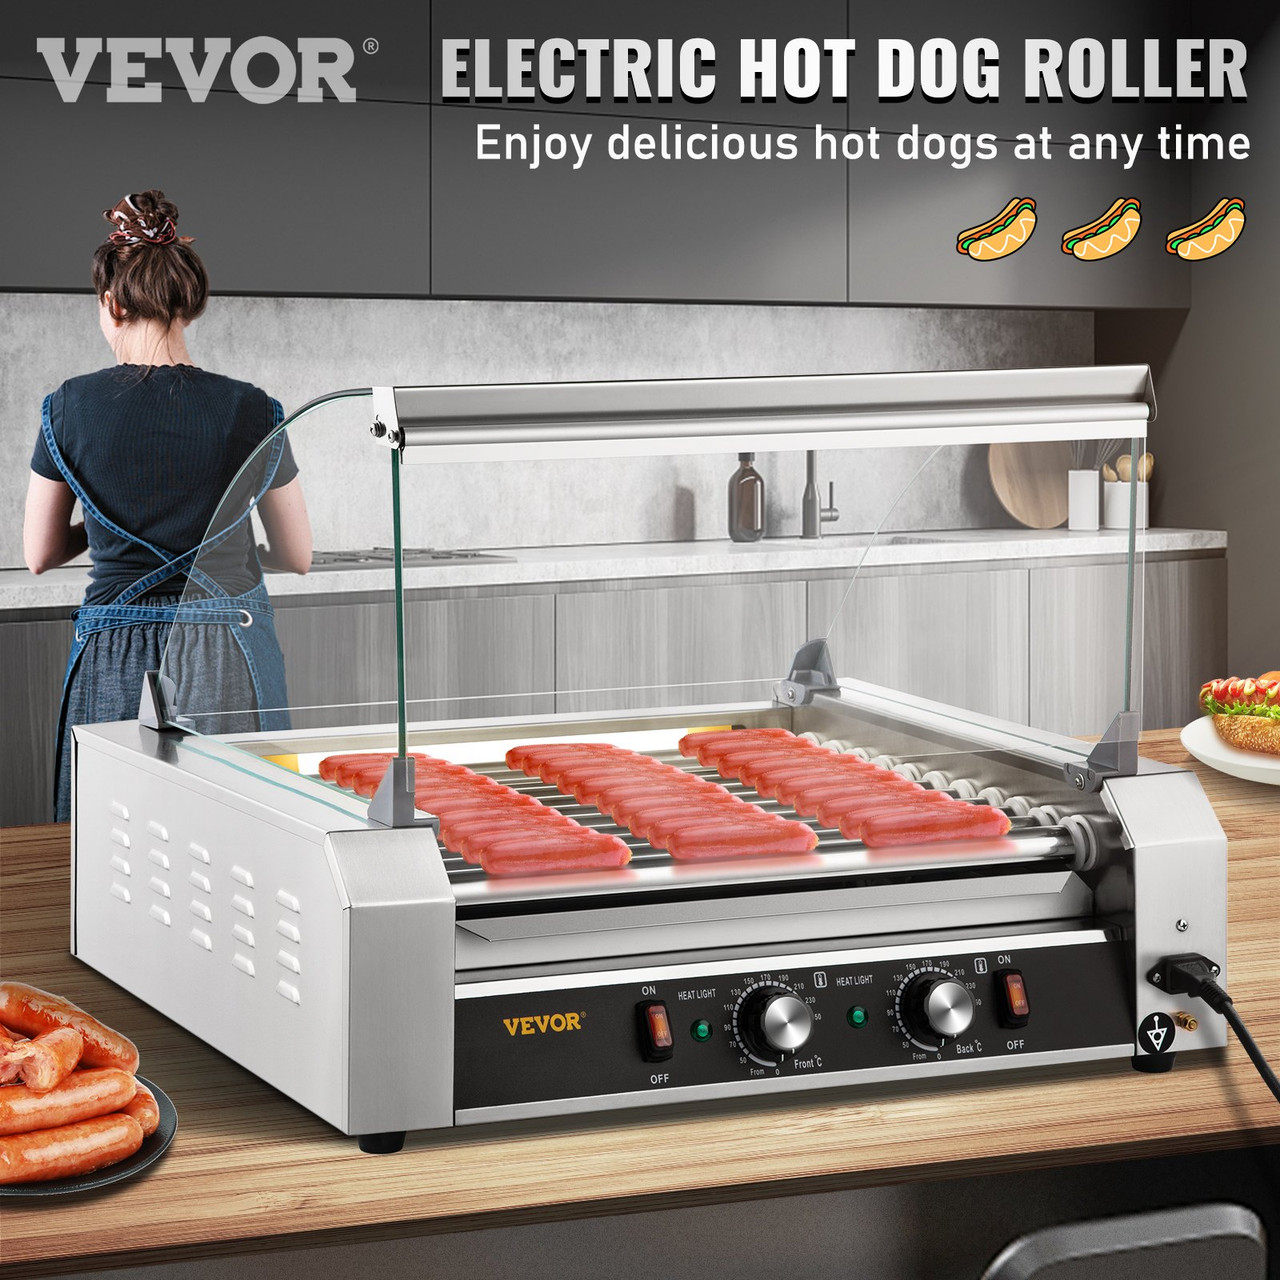 Hot Dog Roller, 30 Hot Dog Capacity 11 Rollers, 1800W Stainless Steel Cook Warmer Machine w/ Cover & Dual Temp Control, LED Light & Detachable Drip Tray, Sausage Grill Cooker for Kitchen CanteenHot Dog Roller, 30 Hot Dog Capacity 11 Rollers, 1800W Stainless Steel Cook Warmer Machine w/ Cover & Dual Temp Control, LED Light & Detachable Drip Tray, Sausage Grill Cooker for Kitchen Canteen